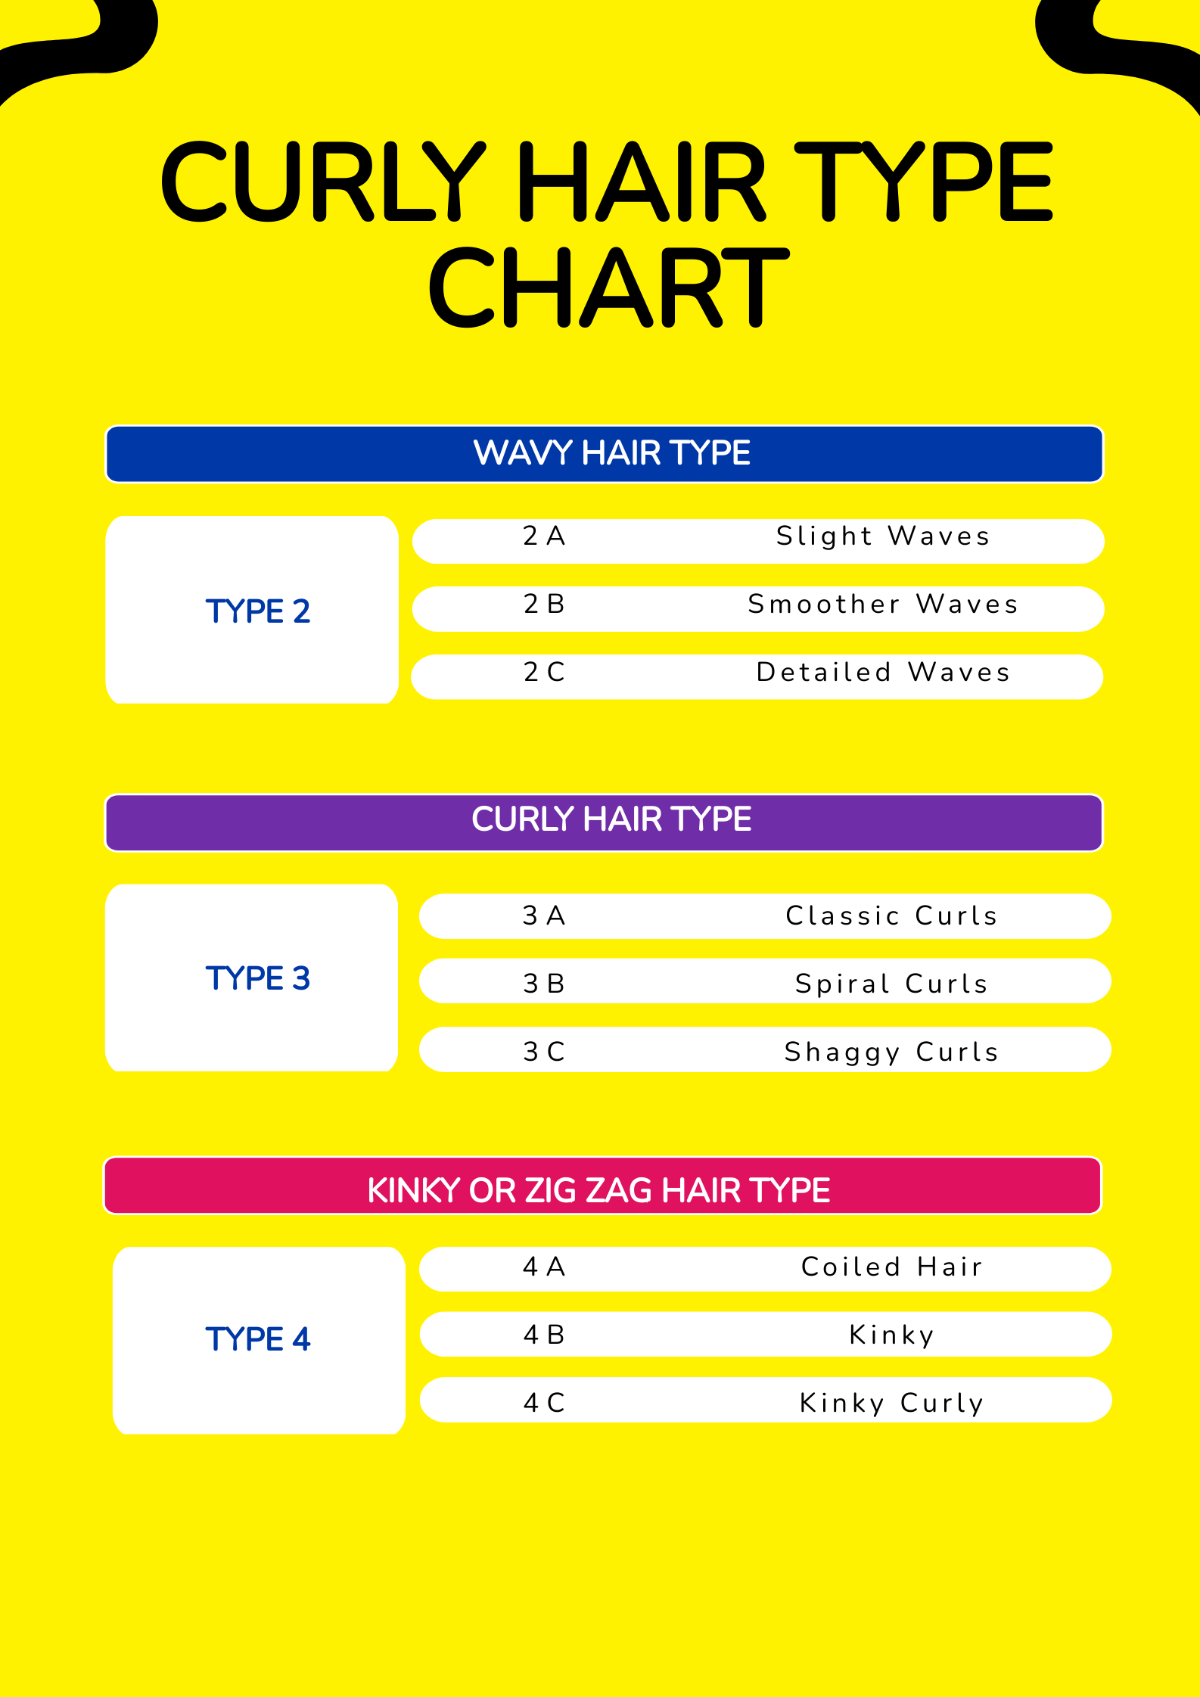 Curly Hair Type Chart Template